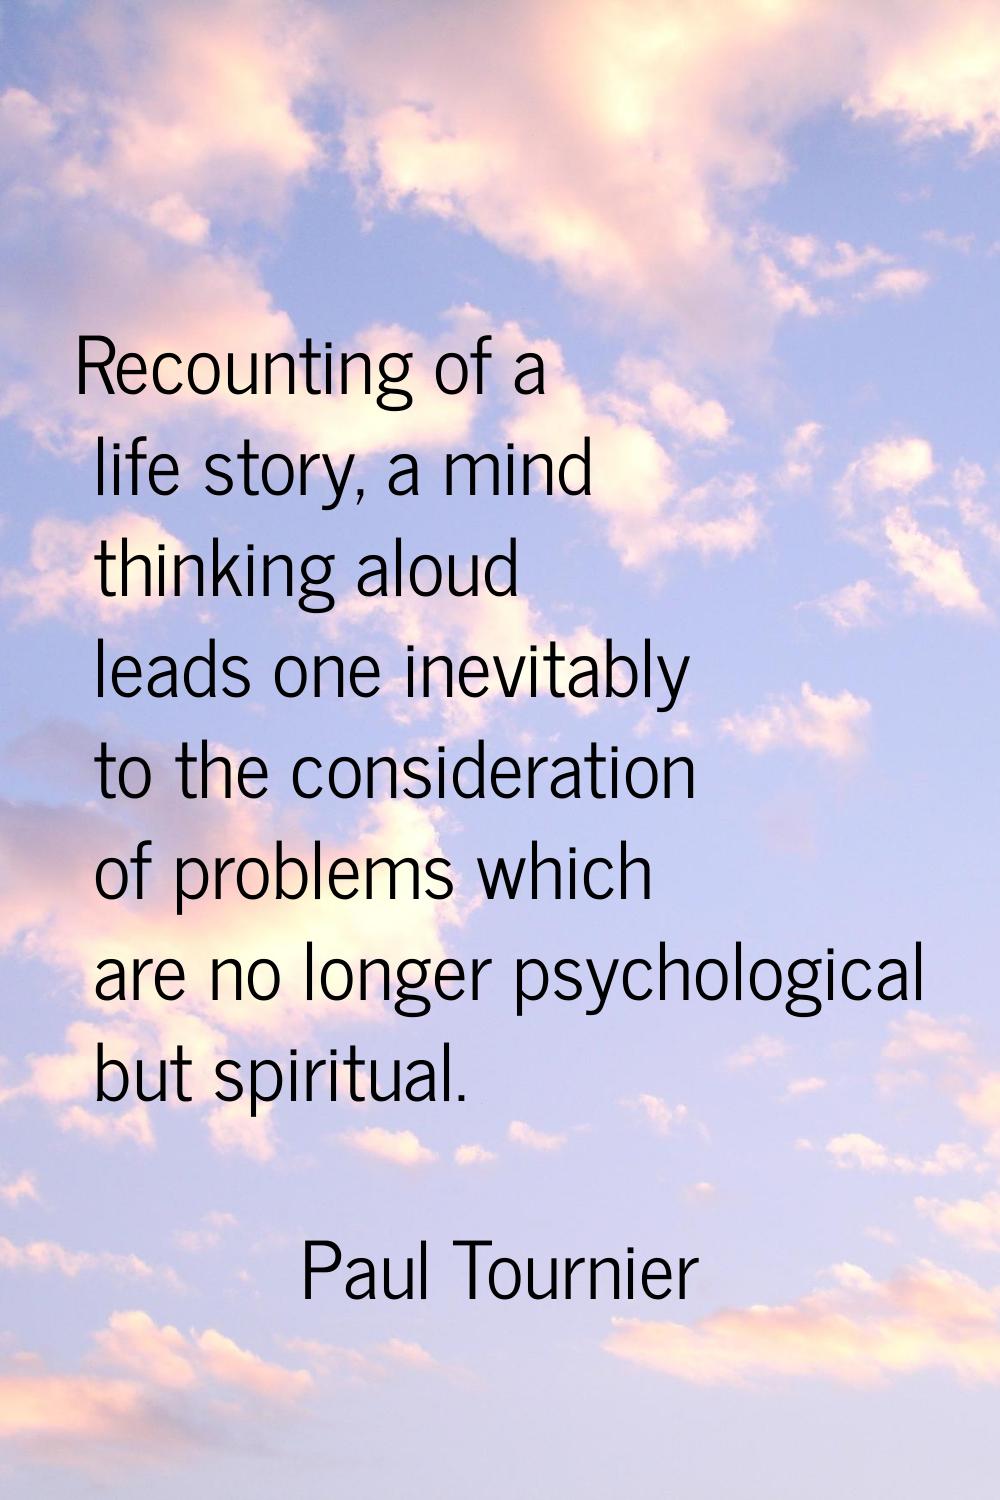 Recounting of a life story, a mind thinking aloud leads one inevitably to the consideration of prob